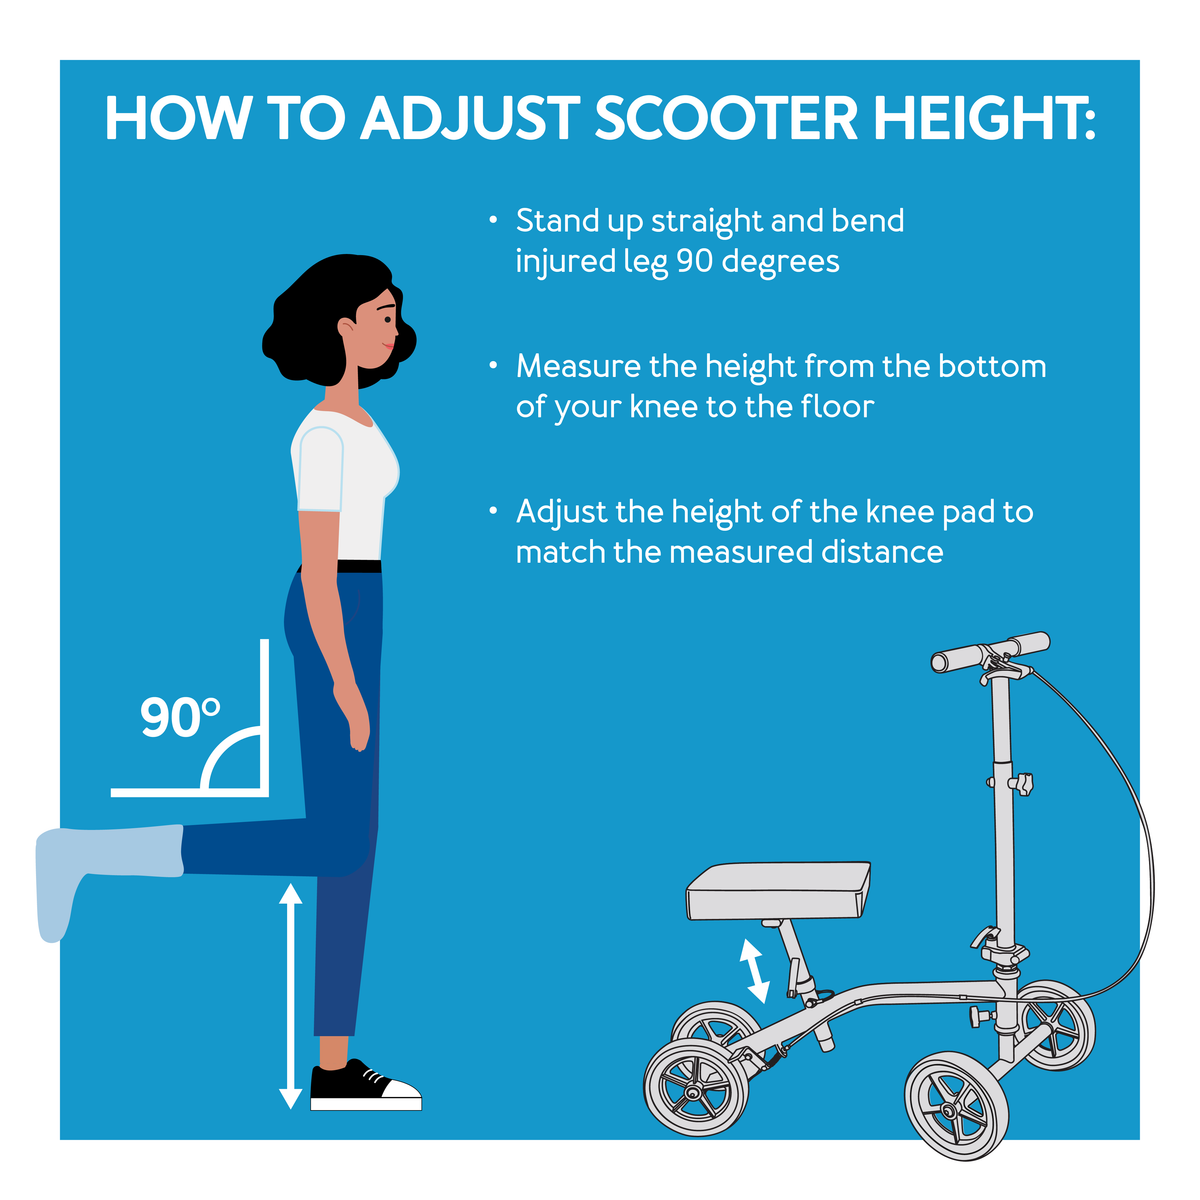 How to adjust scooter height, further details are provided below.